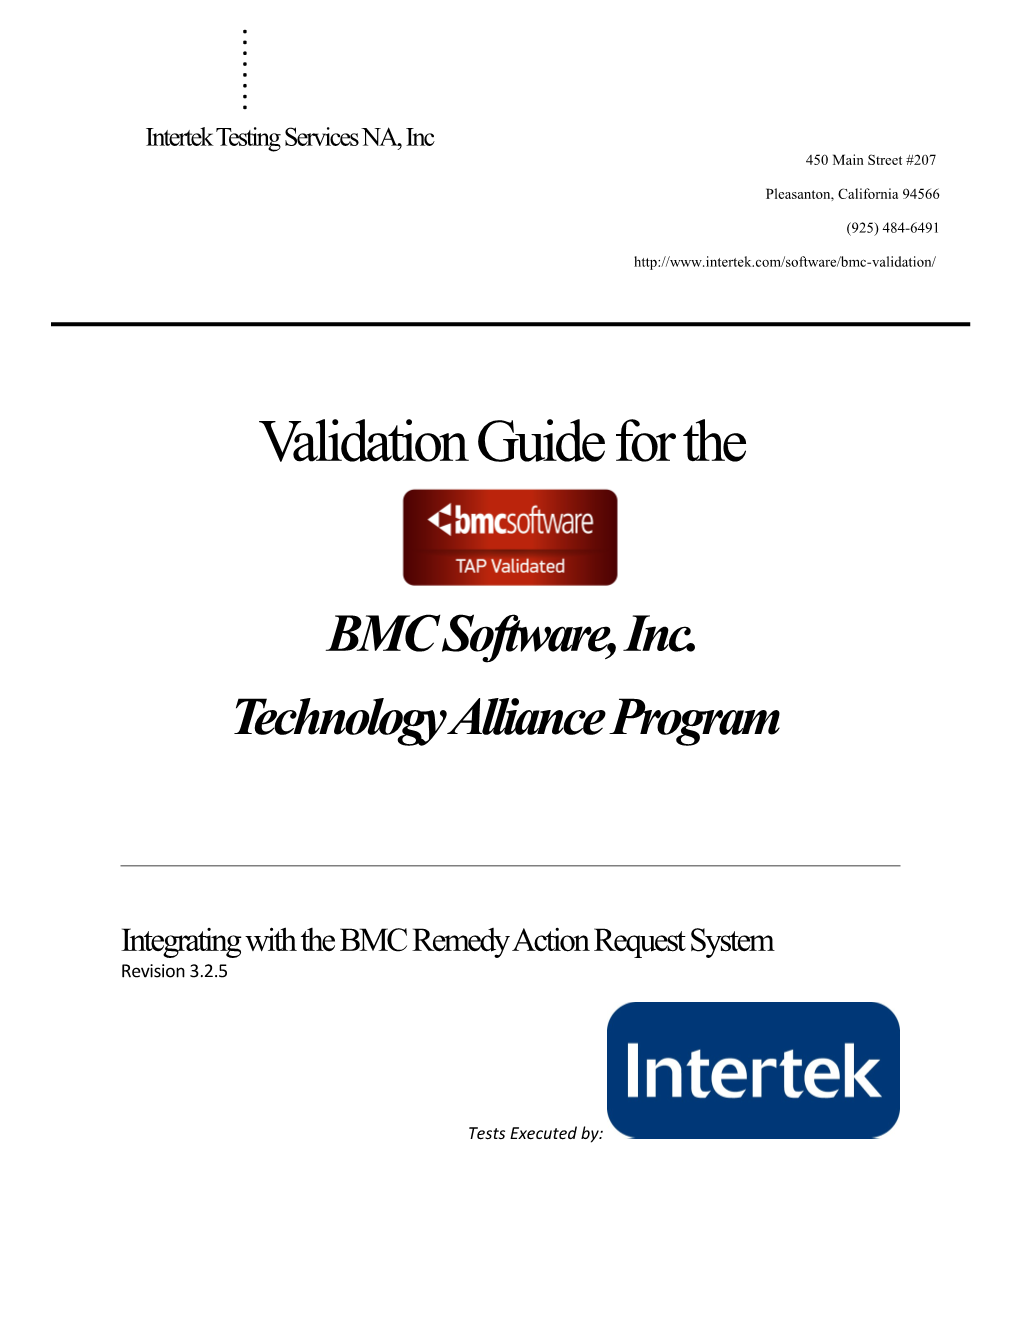 Validation Guide for the Remedy Technology Alliance Program